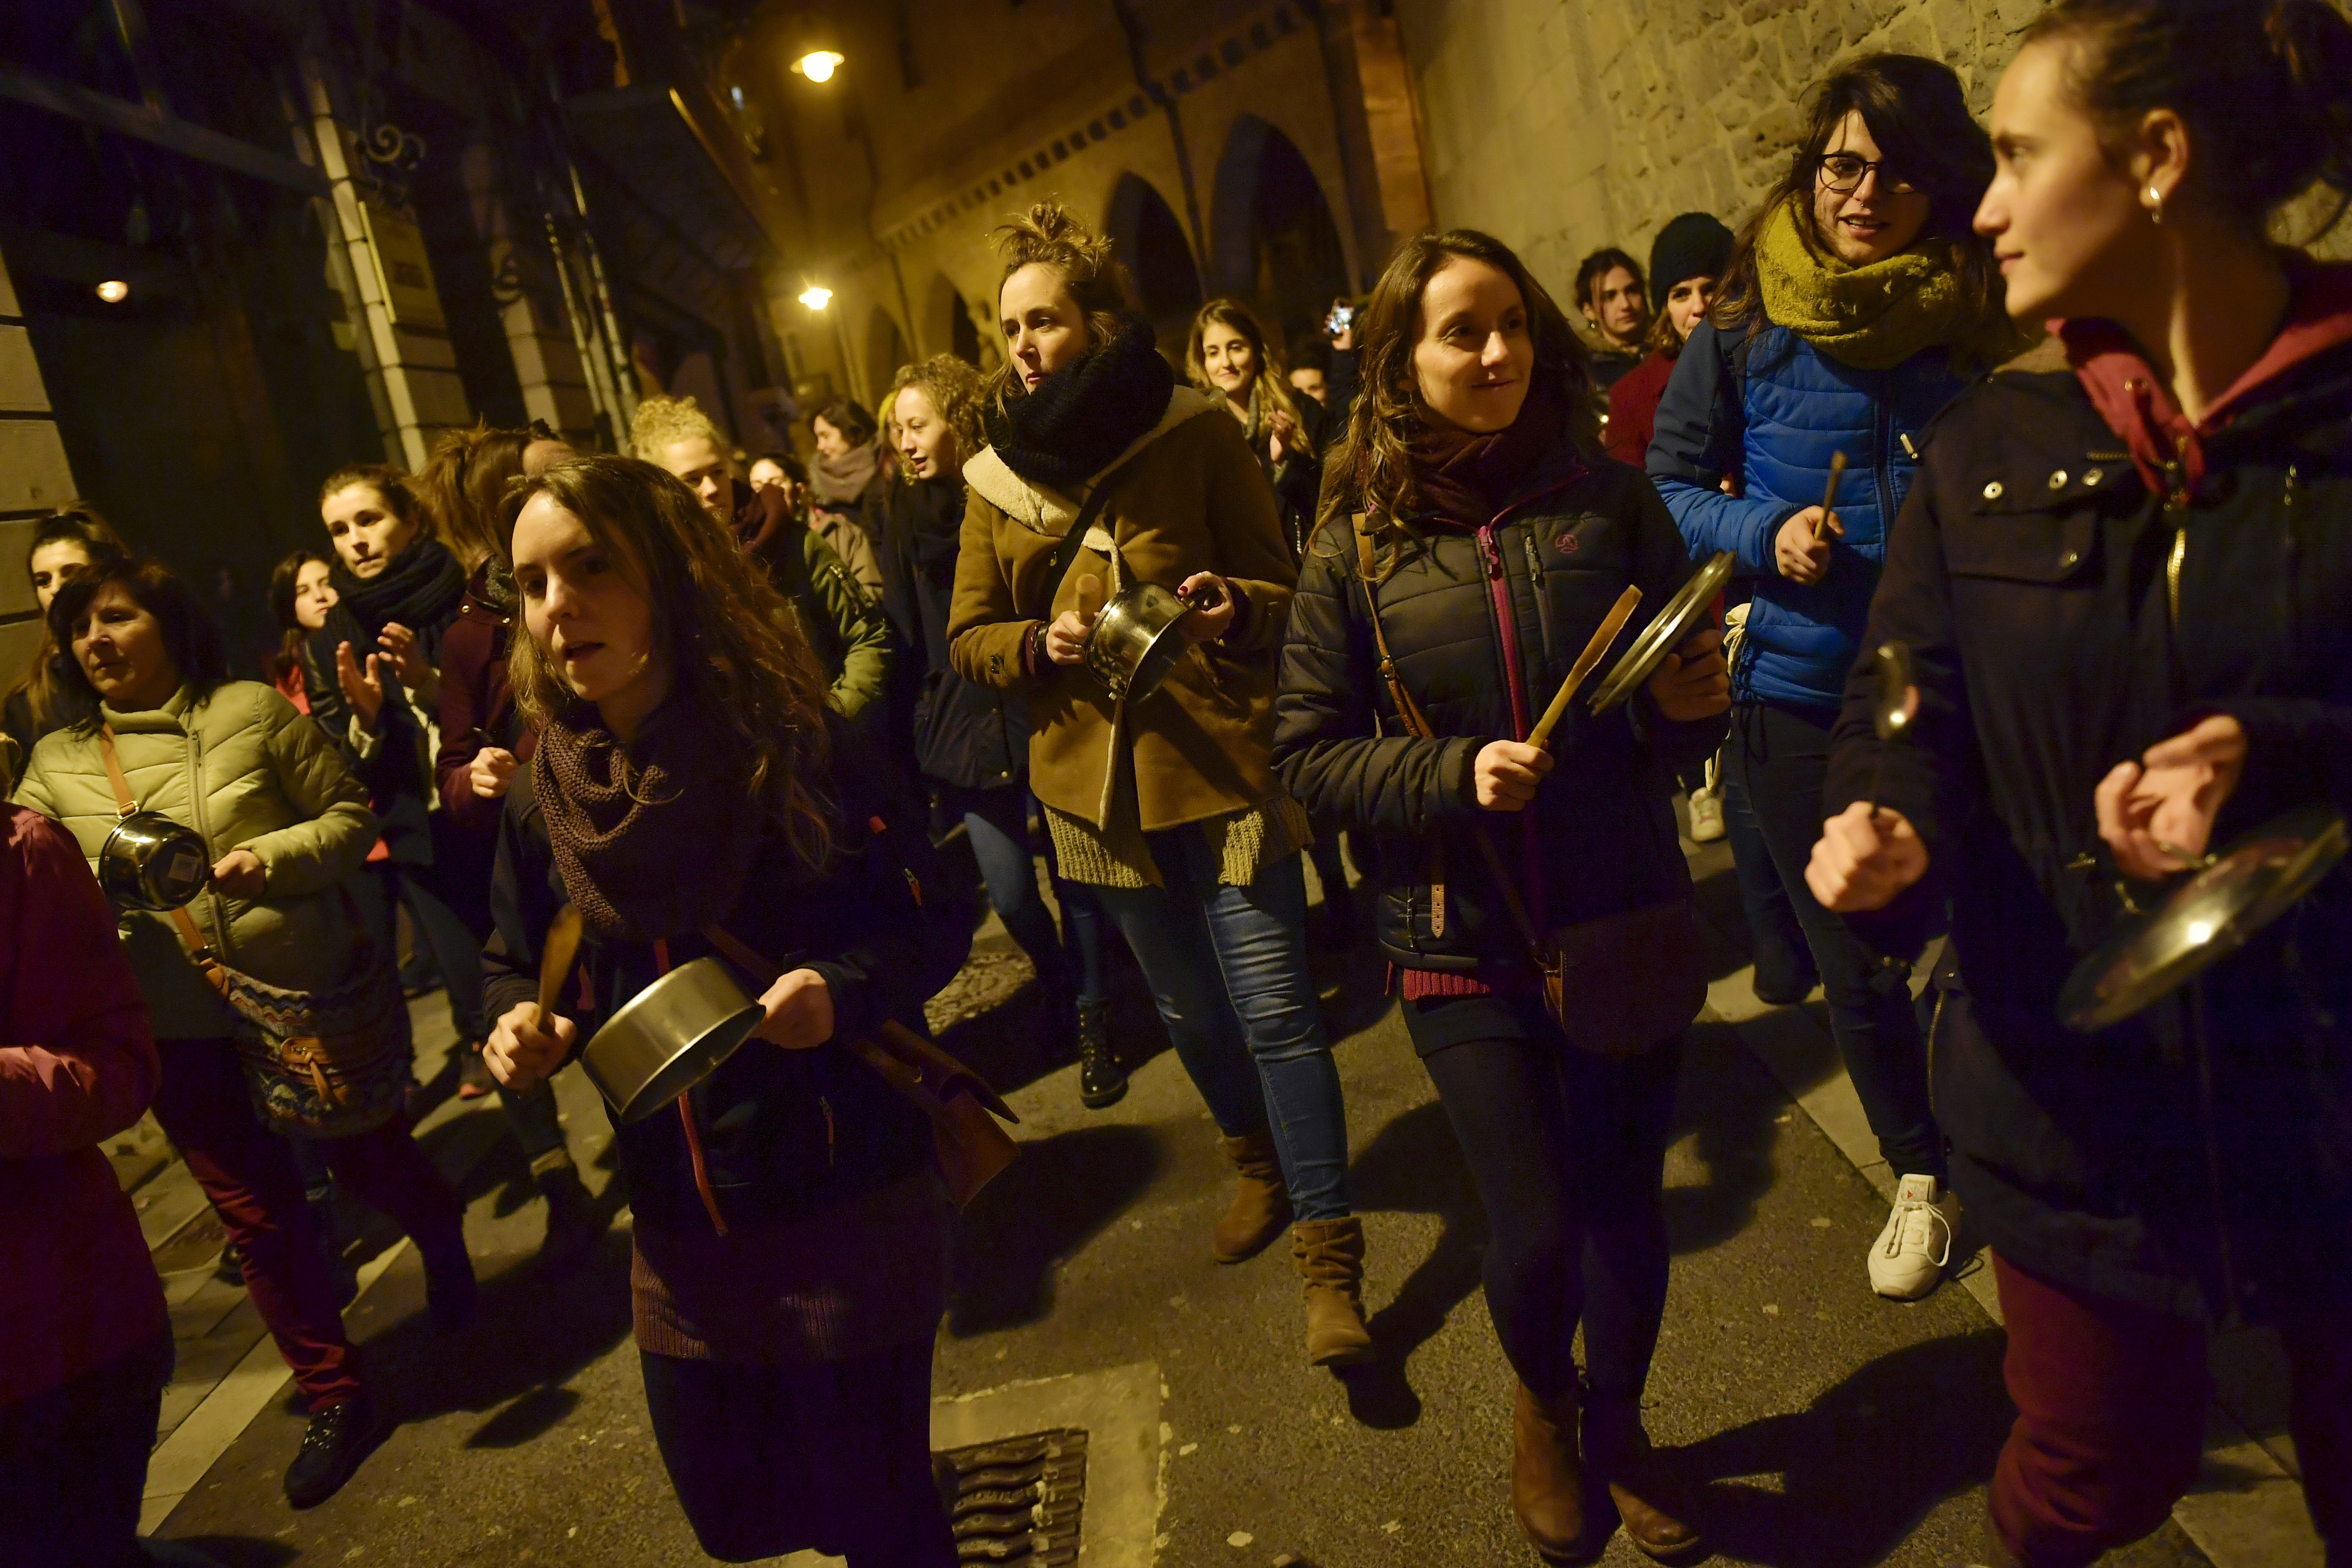 Demonstrators protest male violence against women and demand an equality labour opportunities during the general female strike to commemorate International Women's Day, in Pamplona, northern Spain, Thursday, March 8, 2018. (AP Photo/Alvaro Barrientos)